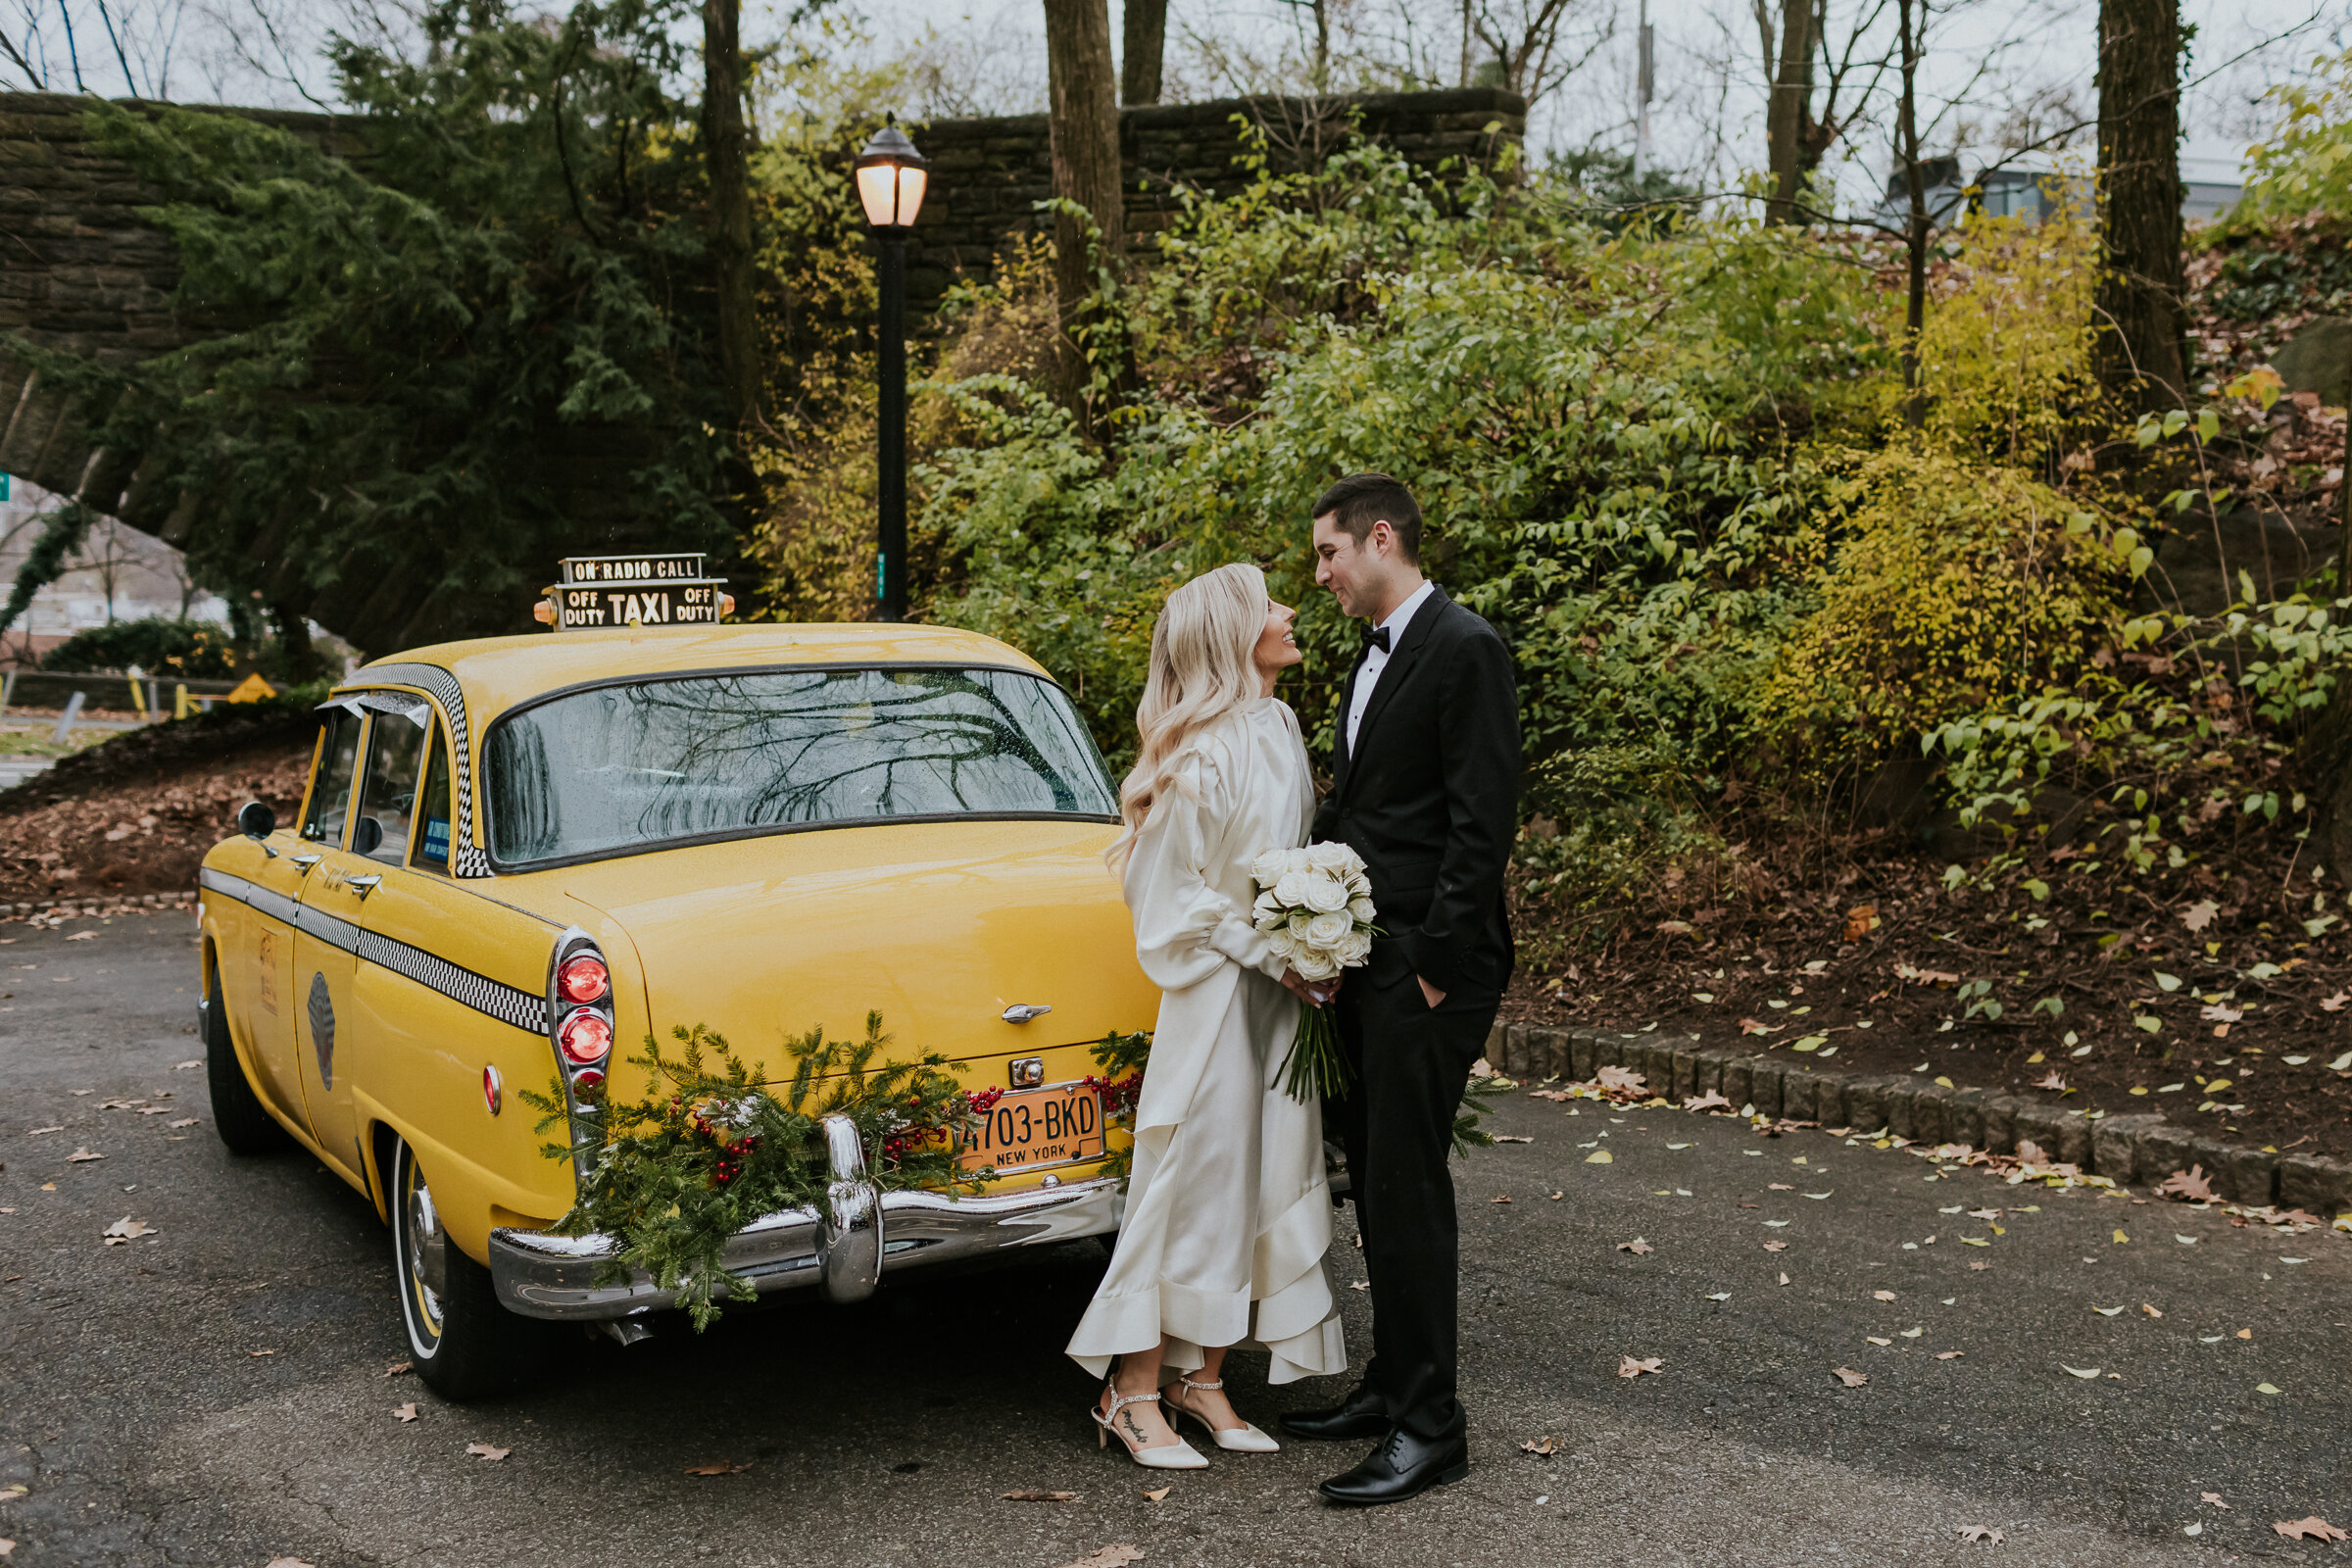 Jacqueline and Albert hired a vintage NY taxi to make it extra festive!